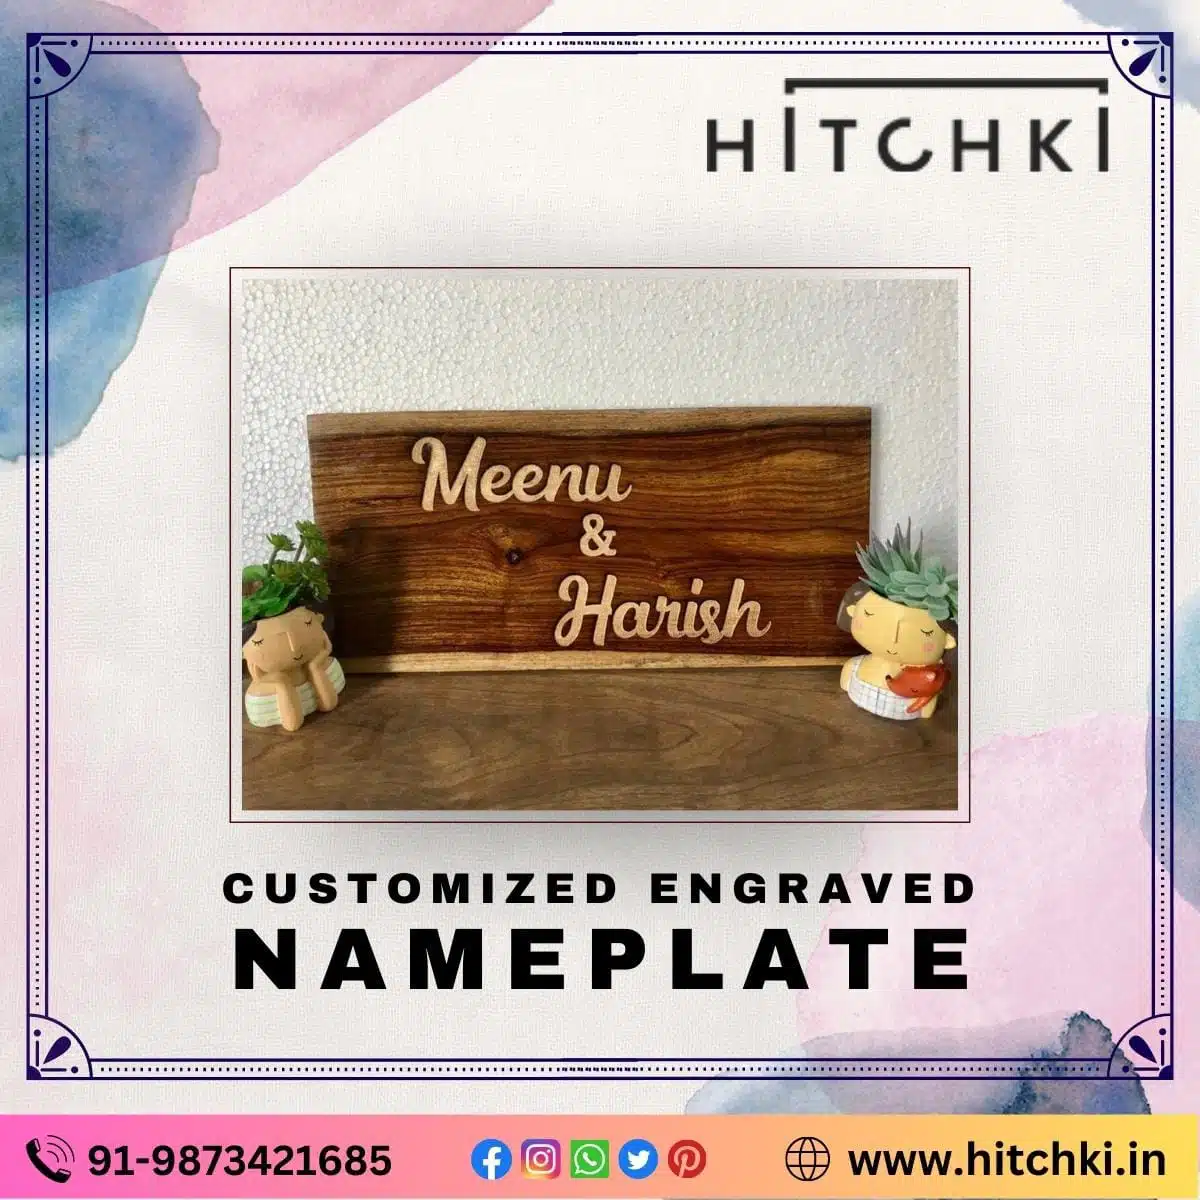 New Customized Engraved Nameplate Online In India